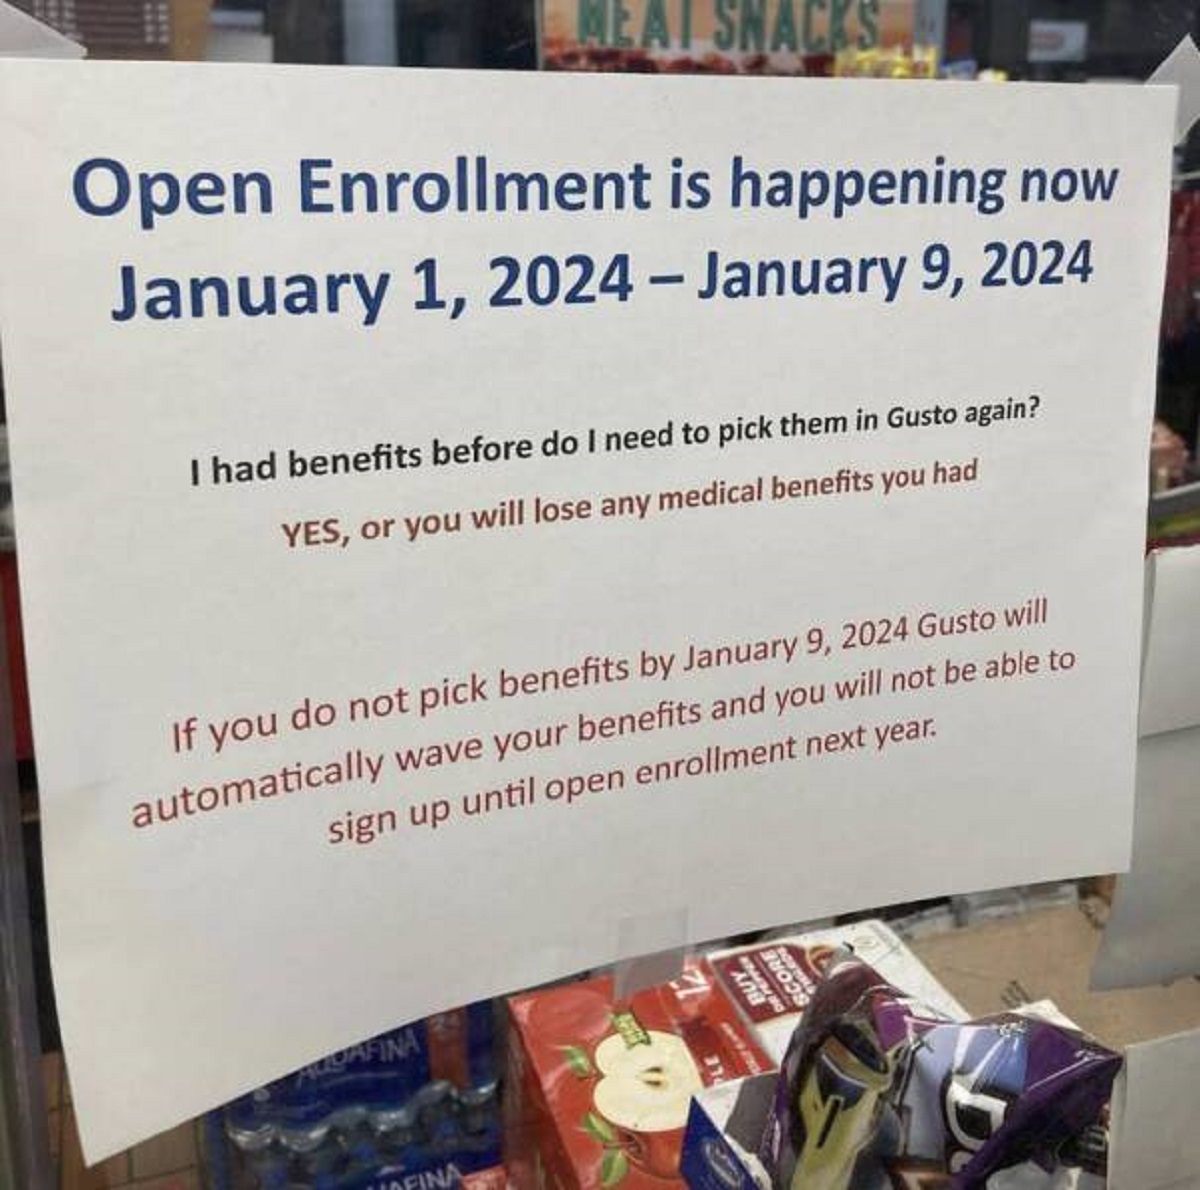 banner - Snacks Open Enrollment is happening now I had benefits before do I need to pick them in Gusto again? Yes, or you will lose any medical benefits you had If you do not pick benefits by Gusto will automatically wave your benefits and you will not be